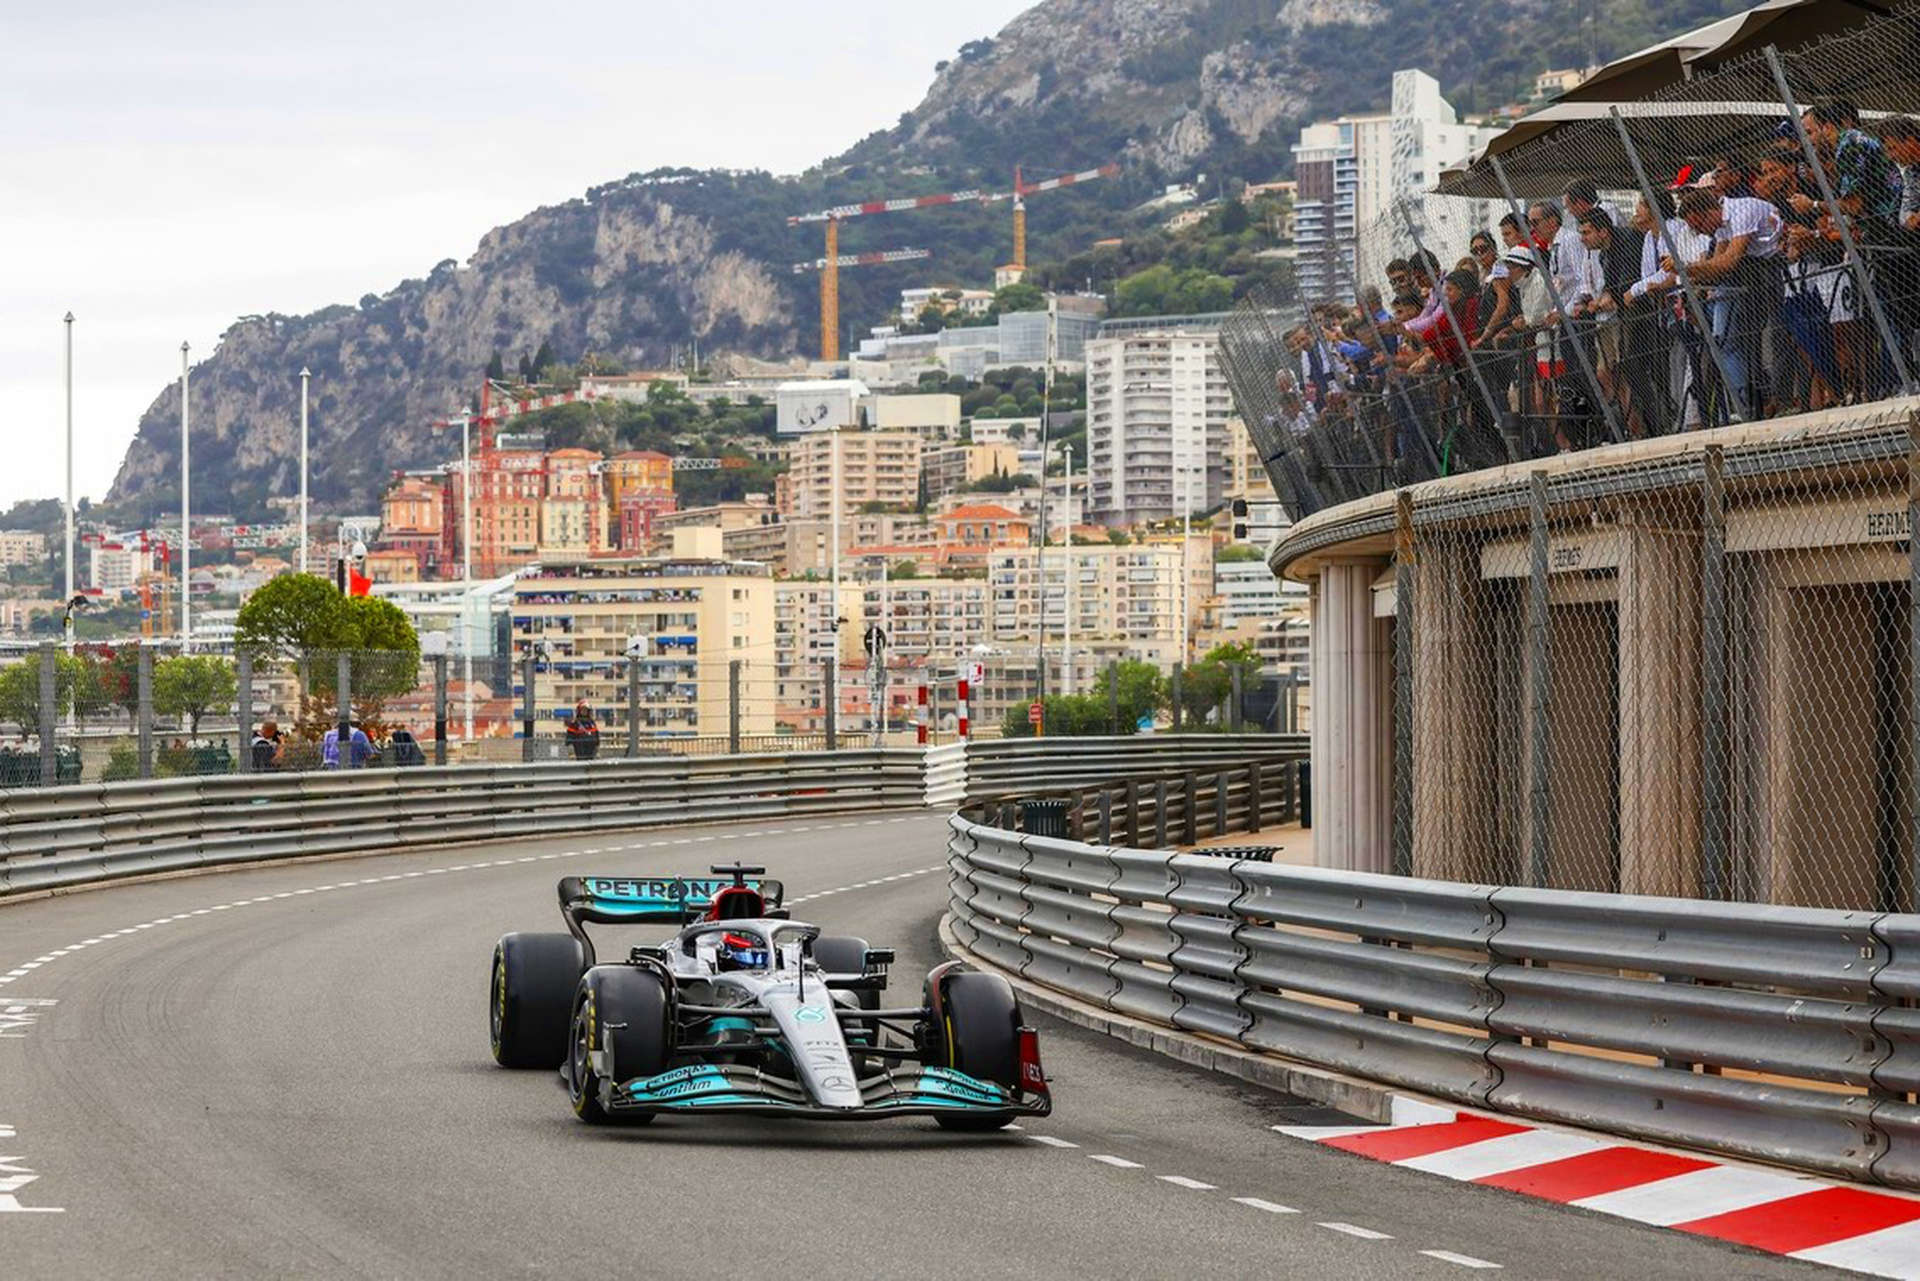 The Monaco Grand Prix™ tests drivers to their limits